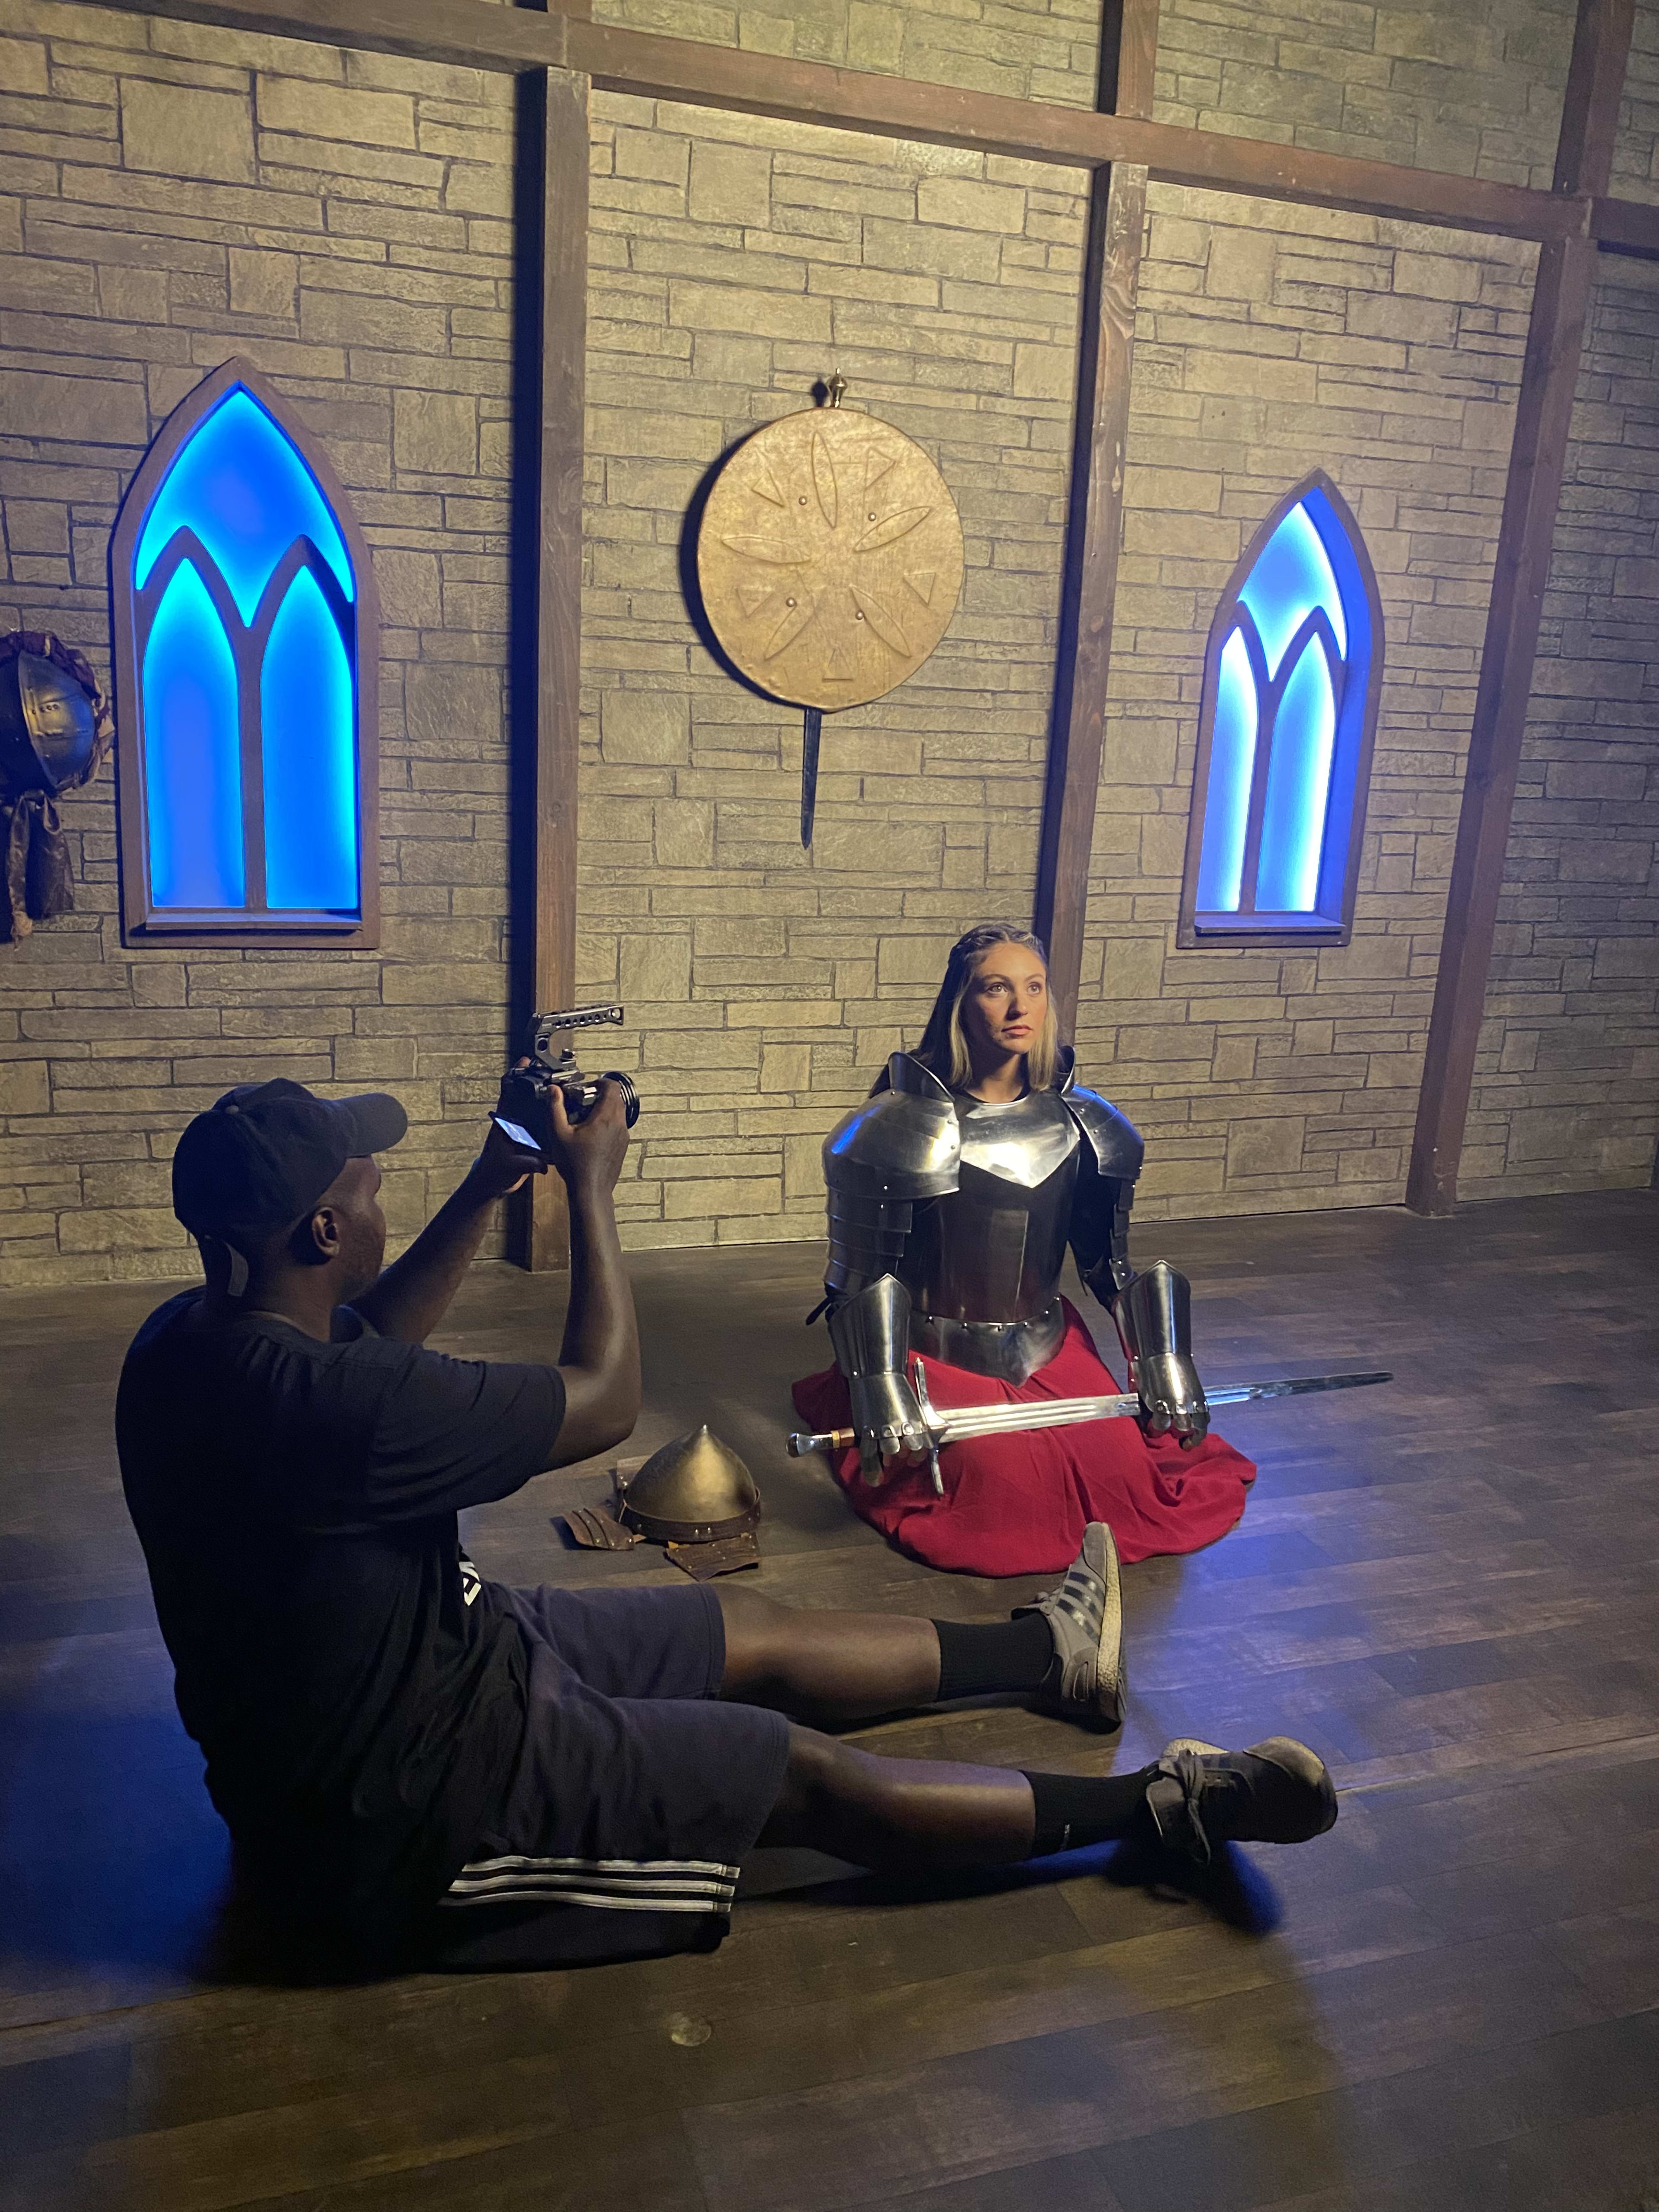 A man taking a picture of a sitting woman in a knight costume